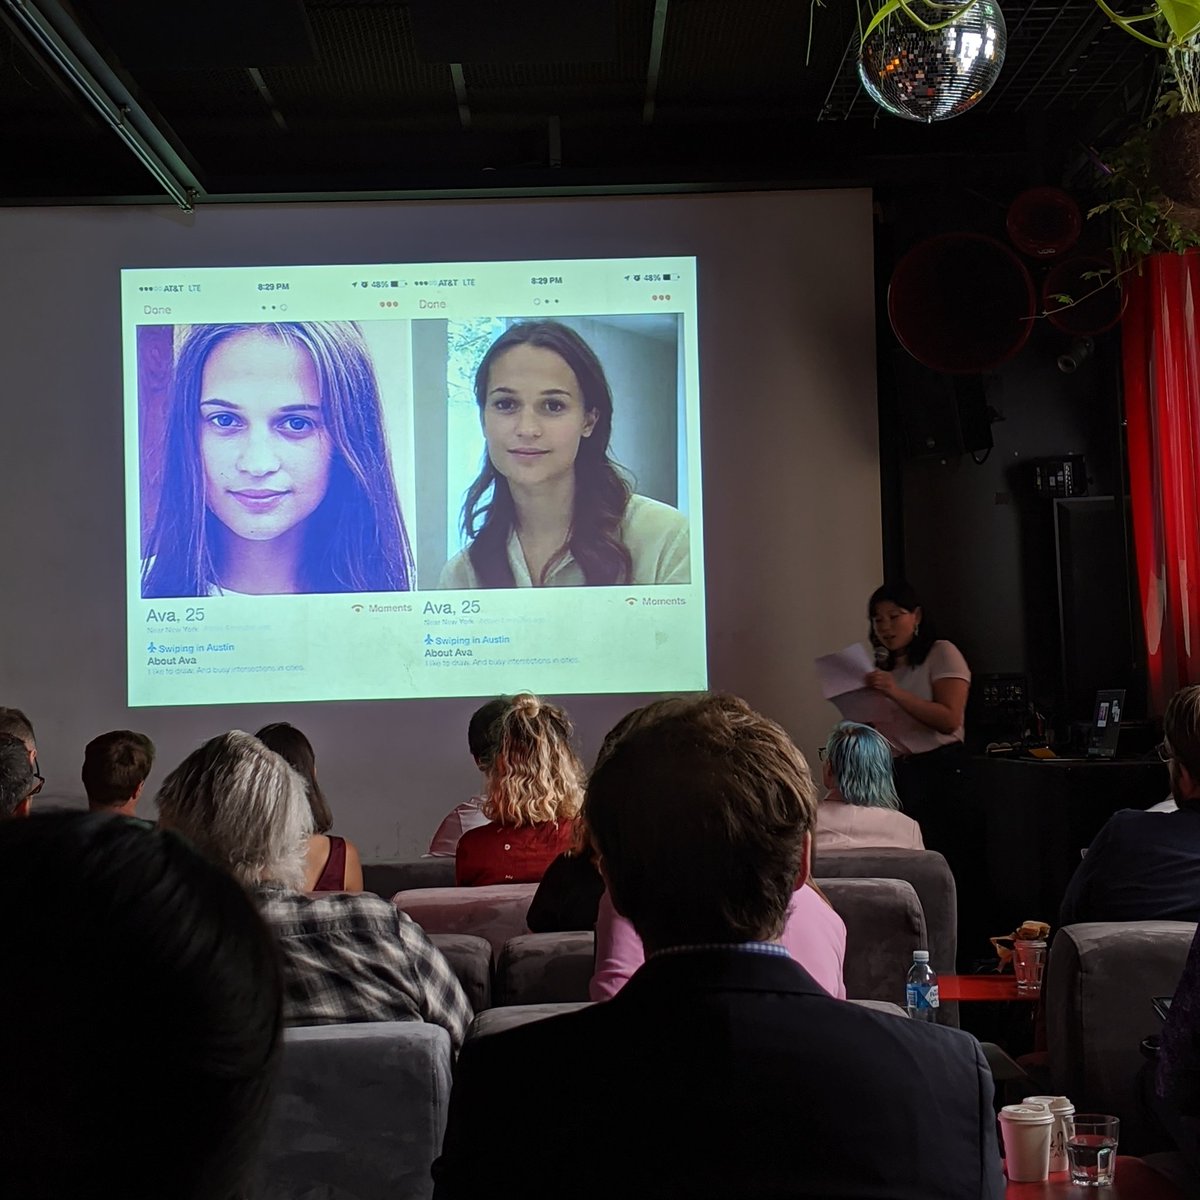 In digital life, the most private parts of our identity are being algorithmically manipulated, says  @thao_pow of the advertising campaign for Ex Machina: the star of the film was featured on Tinder but turned out to be a bot  #autocult